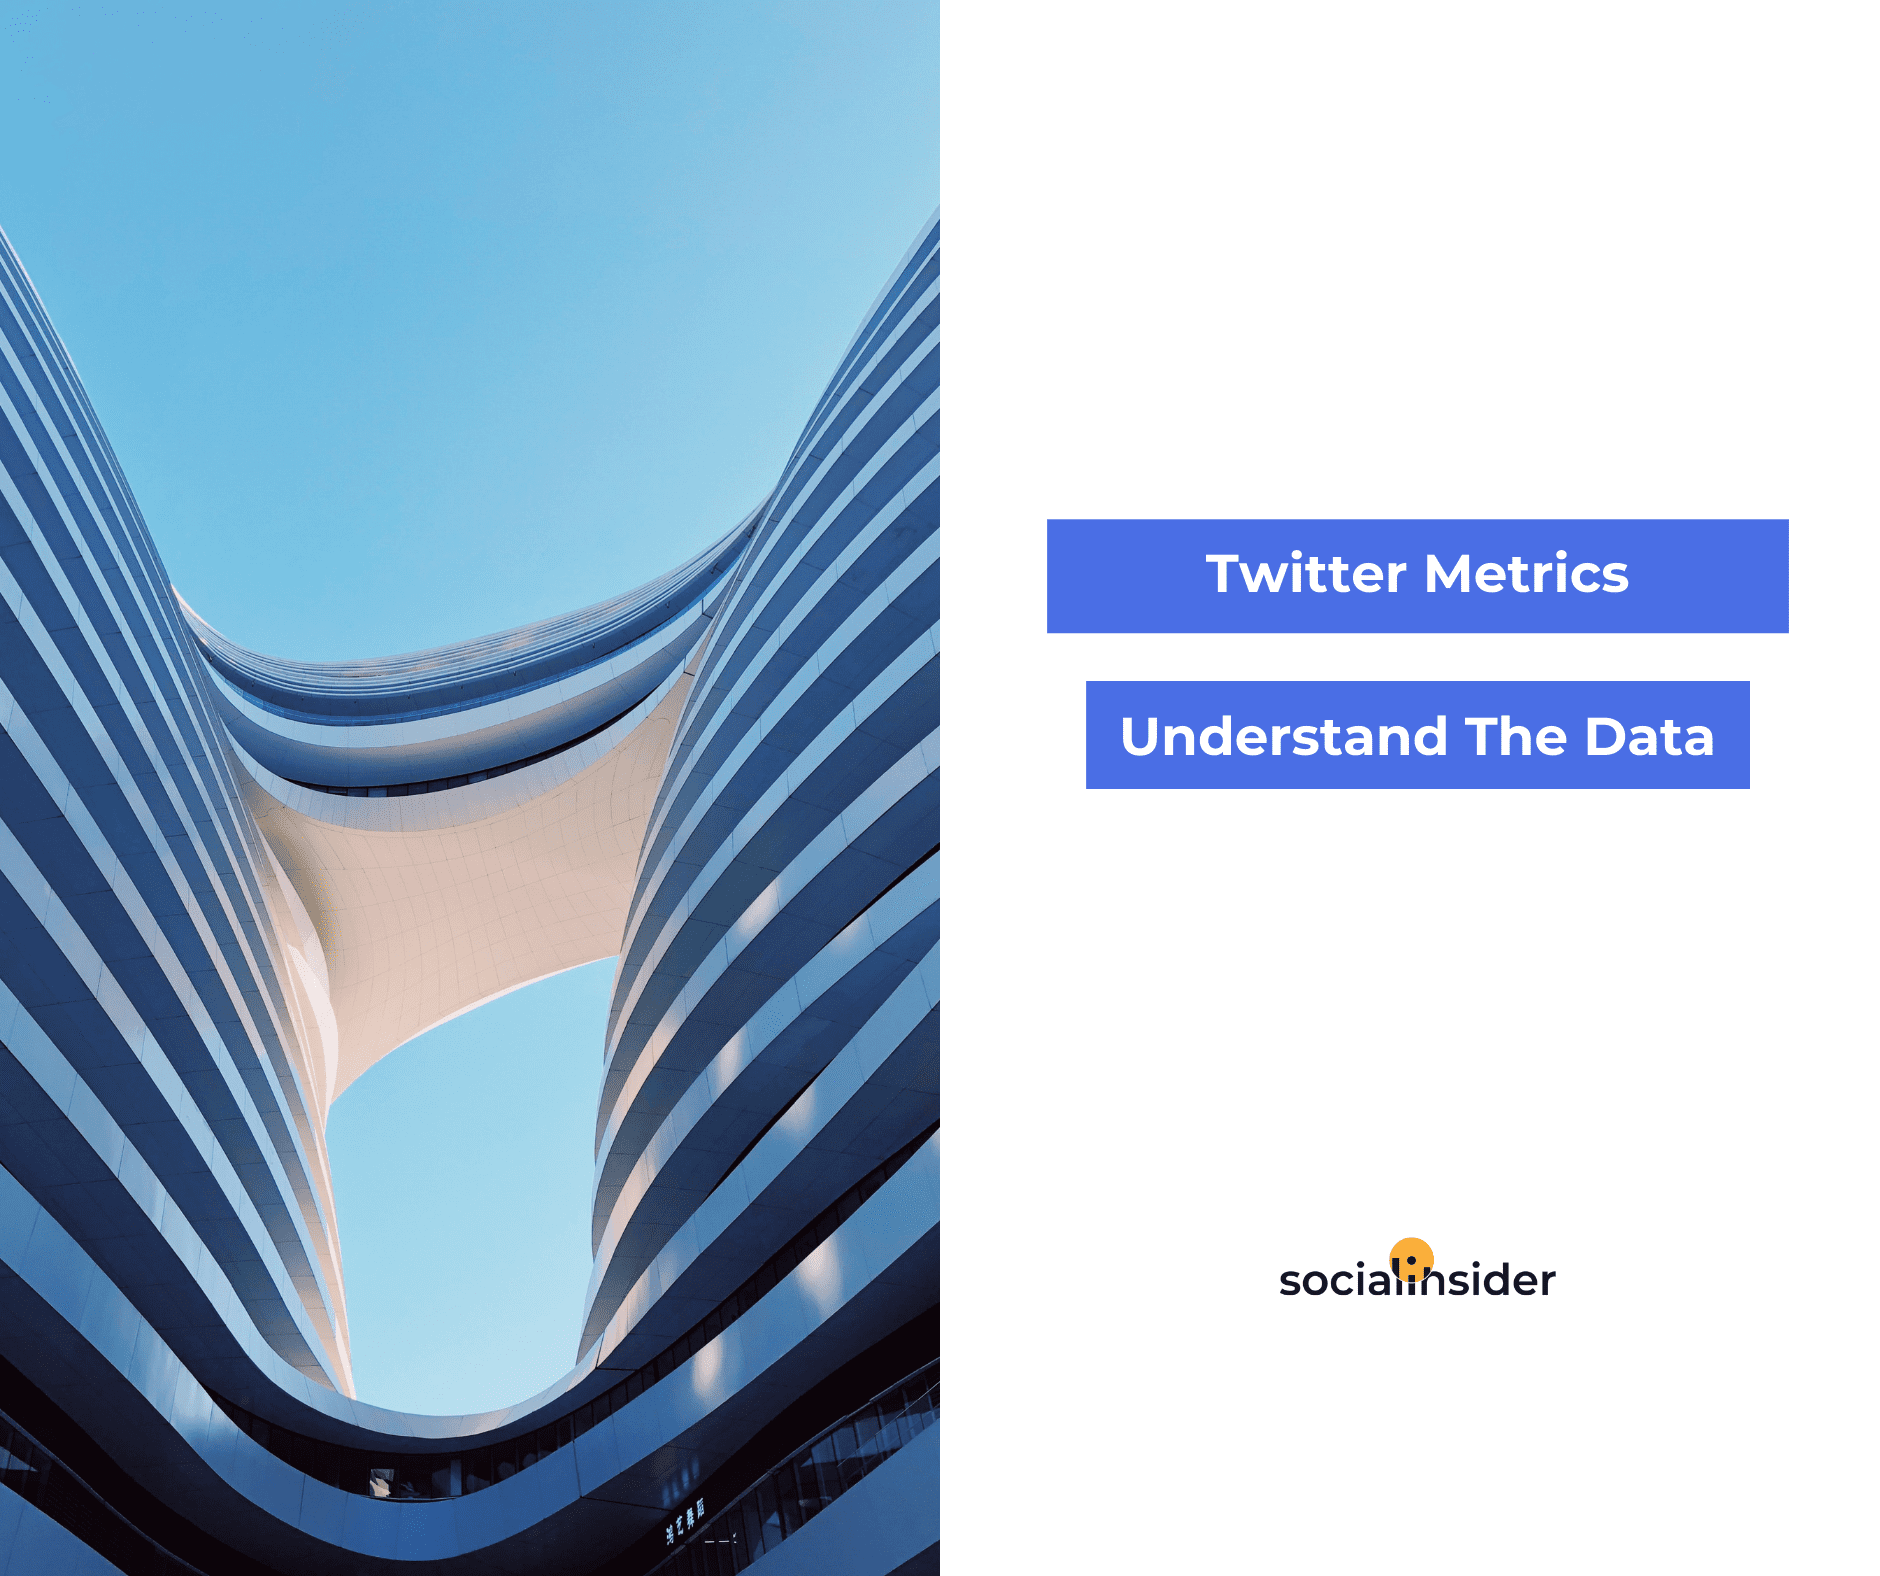 Top 10 Twitter Metrics and How to Measure Them